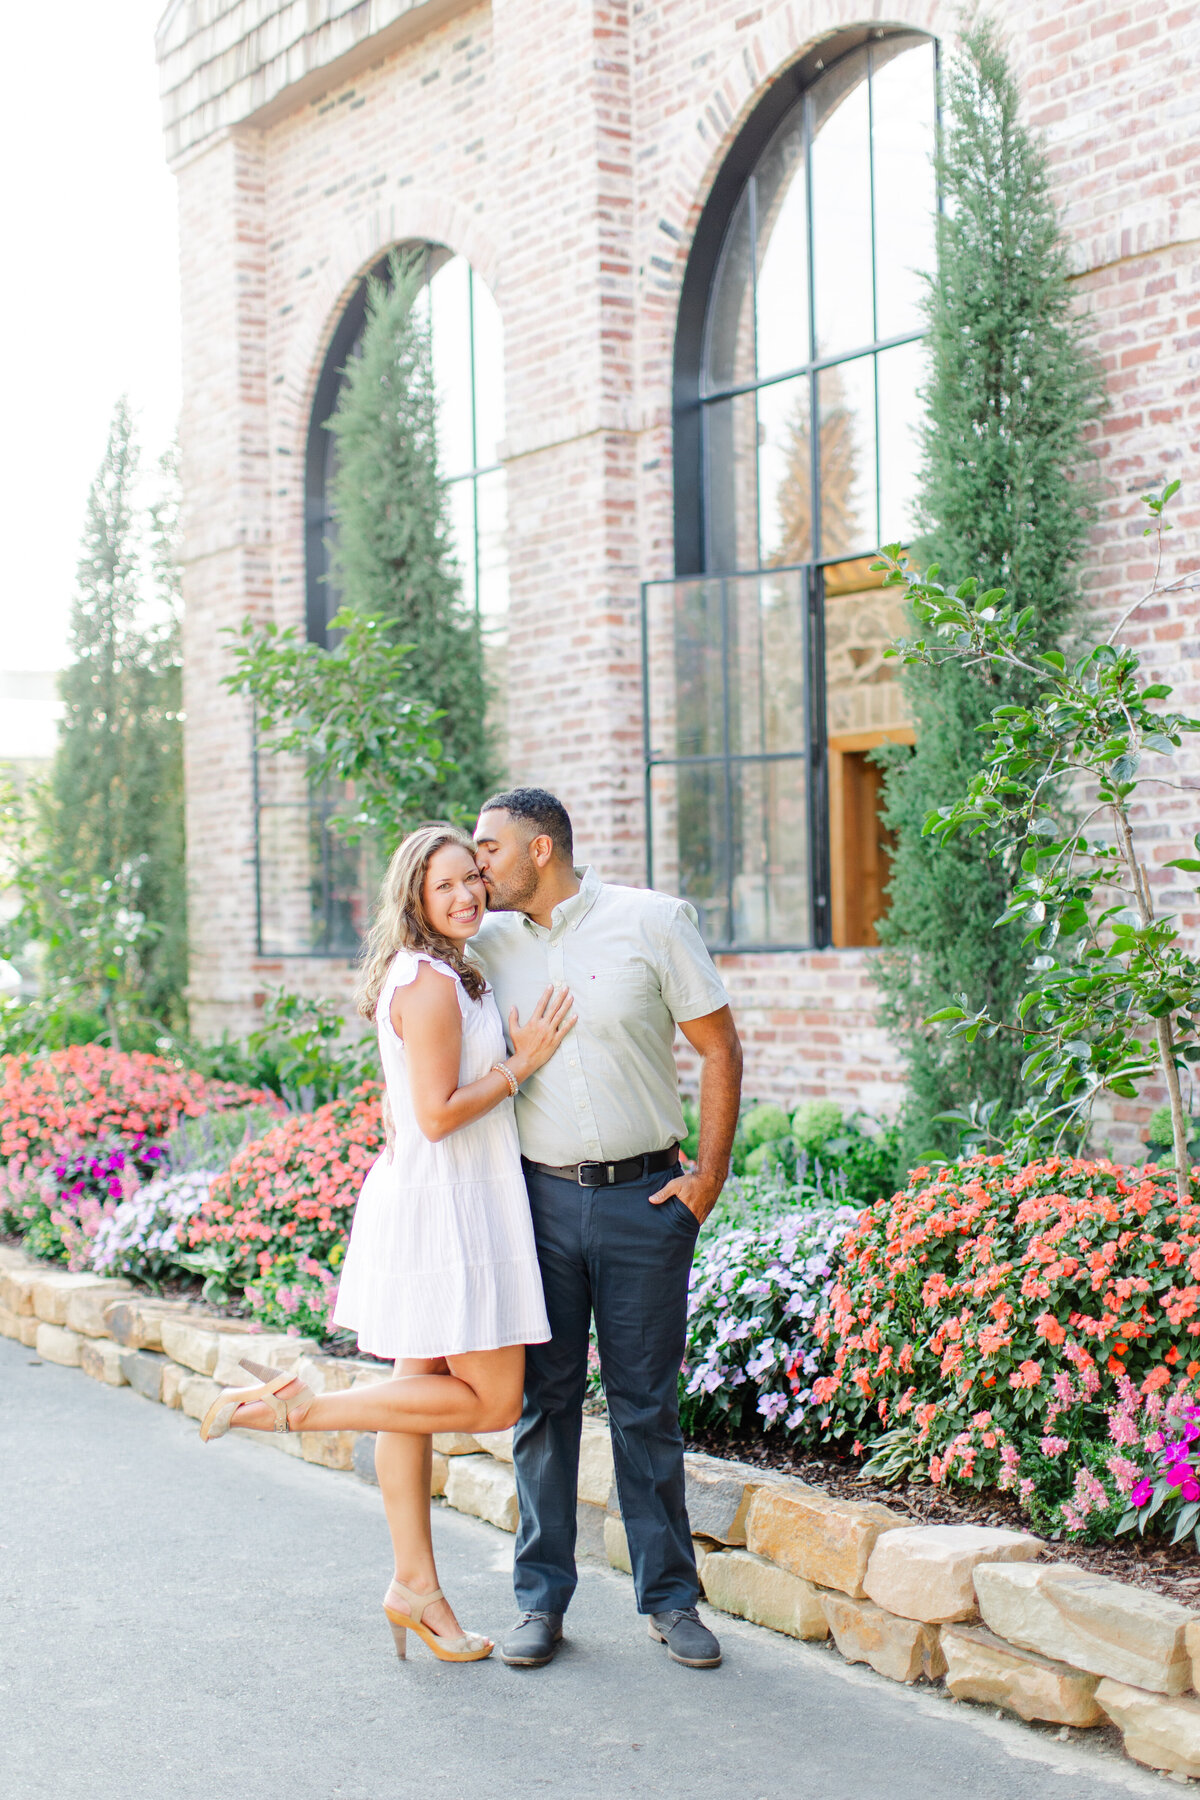 BethAnneandChrisSVHPhotography-84